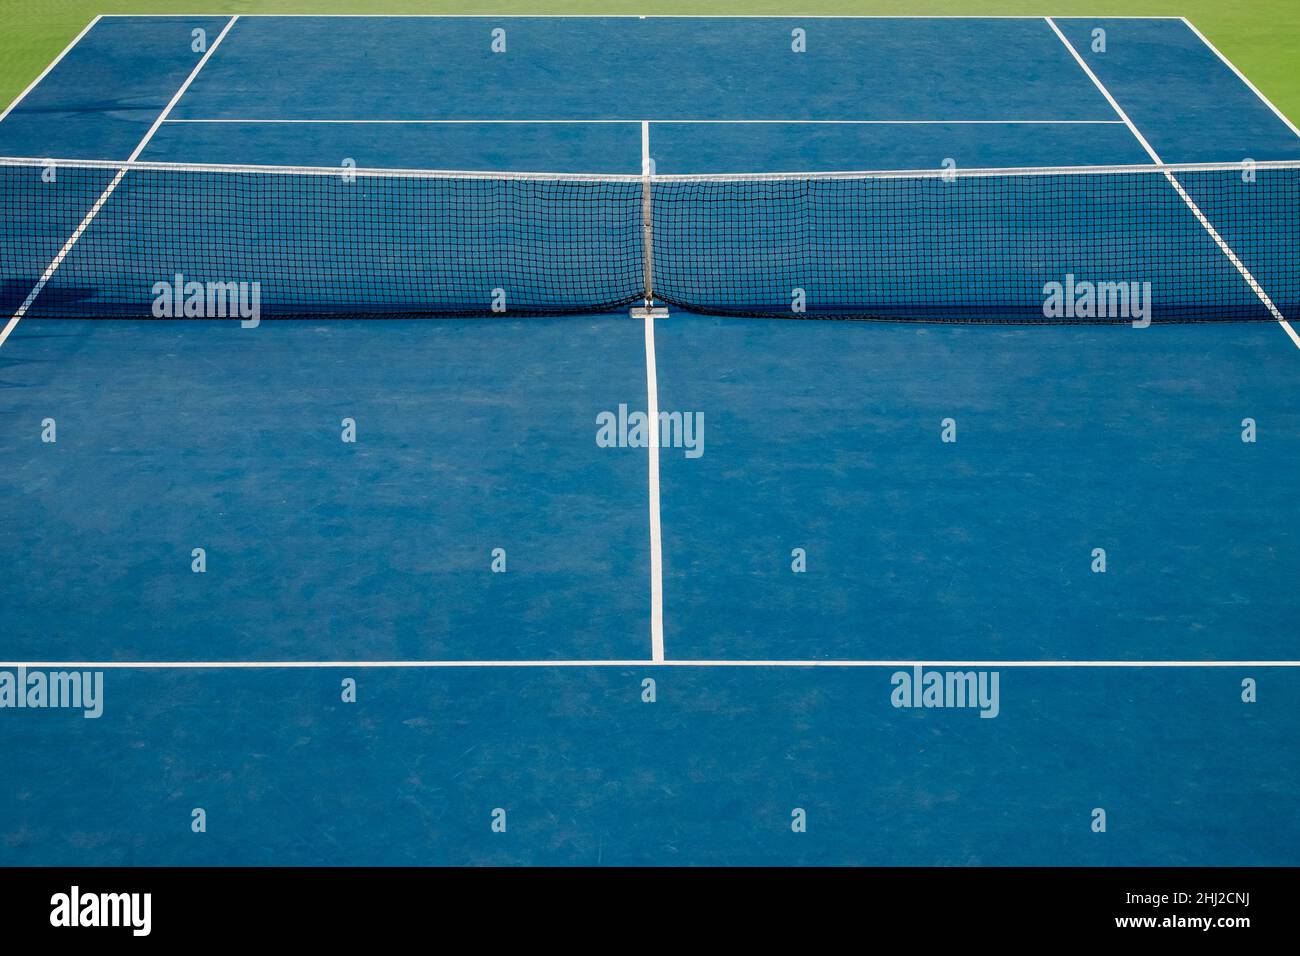 Tennis court front view. Blue and green colors Stock Photo